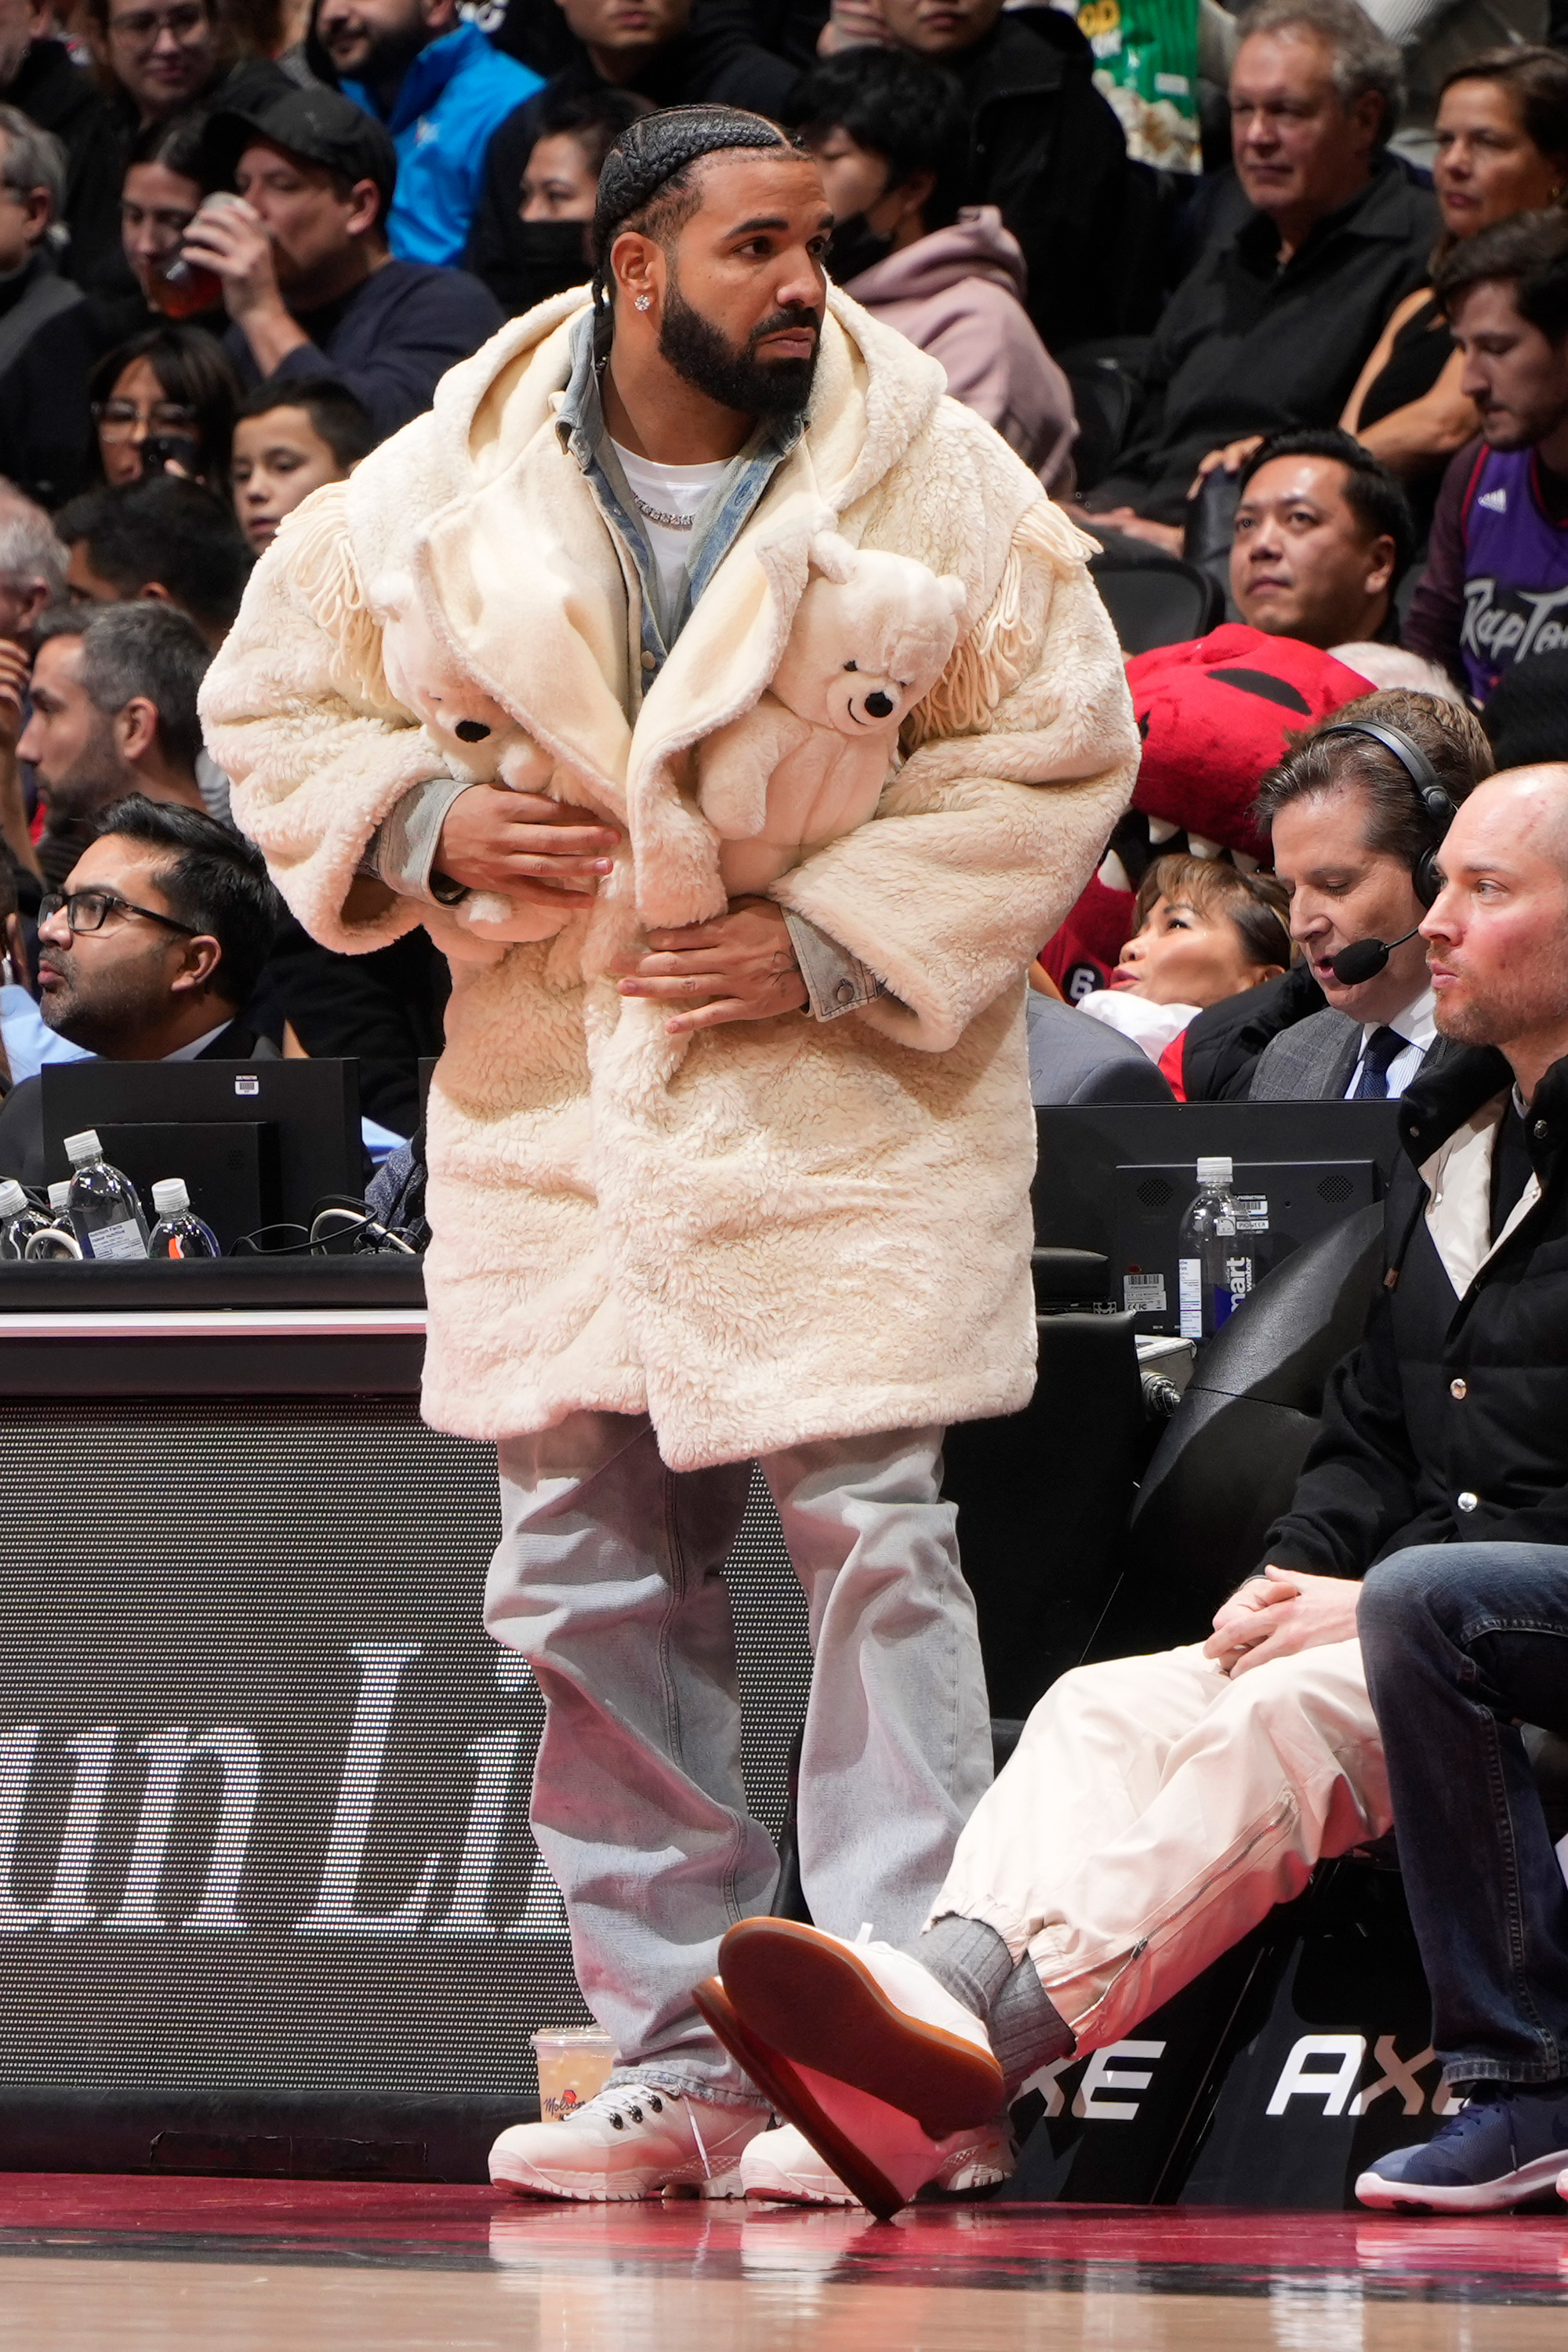 Drake attends the game between the Brooklyn Nets and Toronto Raptors on November 23, 2022 at the Scotiabank Arena in Toronto, Ontario, Canada.